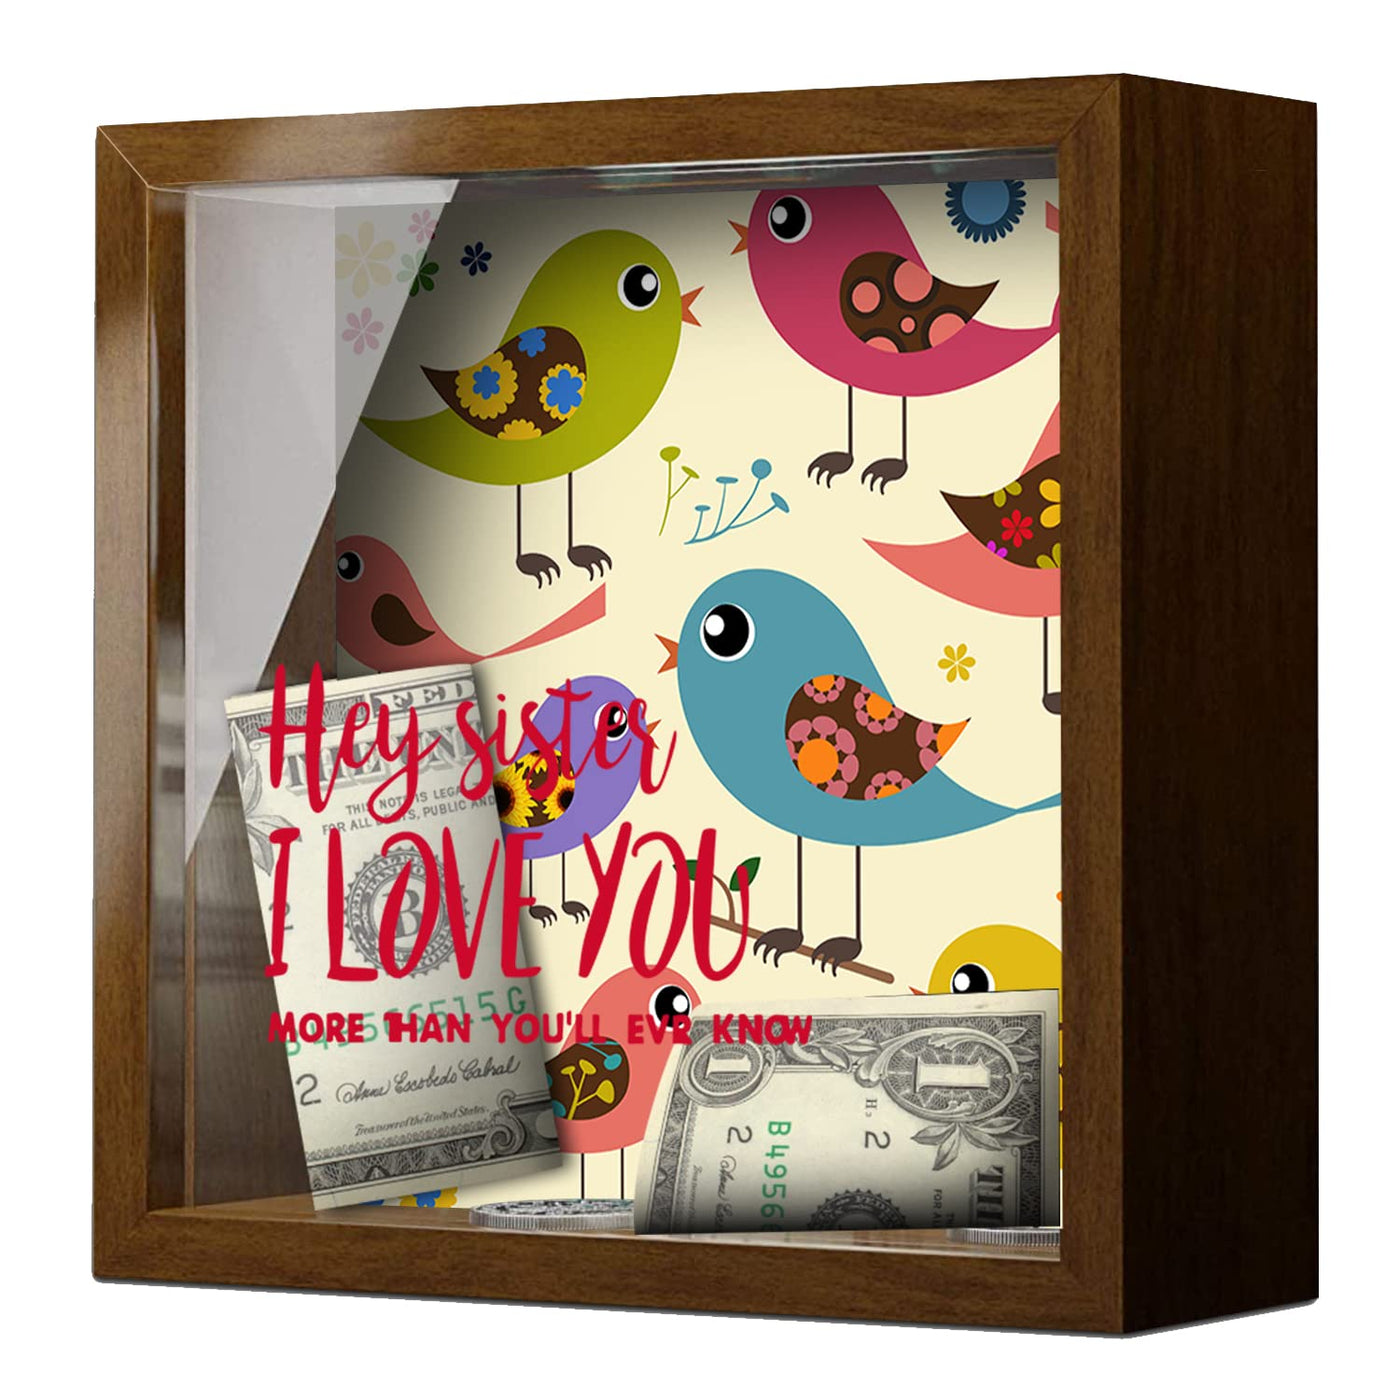 Hey Sister-I Love You Shadow Box Wall Decor - 6x6x2" Wooden Sister Themed Display Case - Keepsake Piggy Bank Gift for Home, Teen Girl Bedroom, Girls Room Decoration. Fun Gift Idea for Sisters!